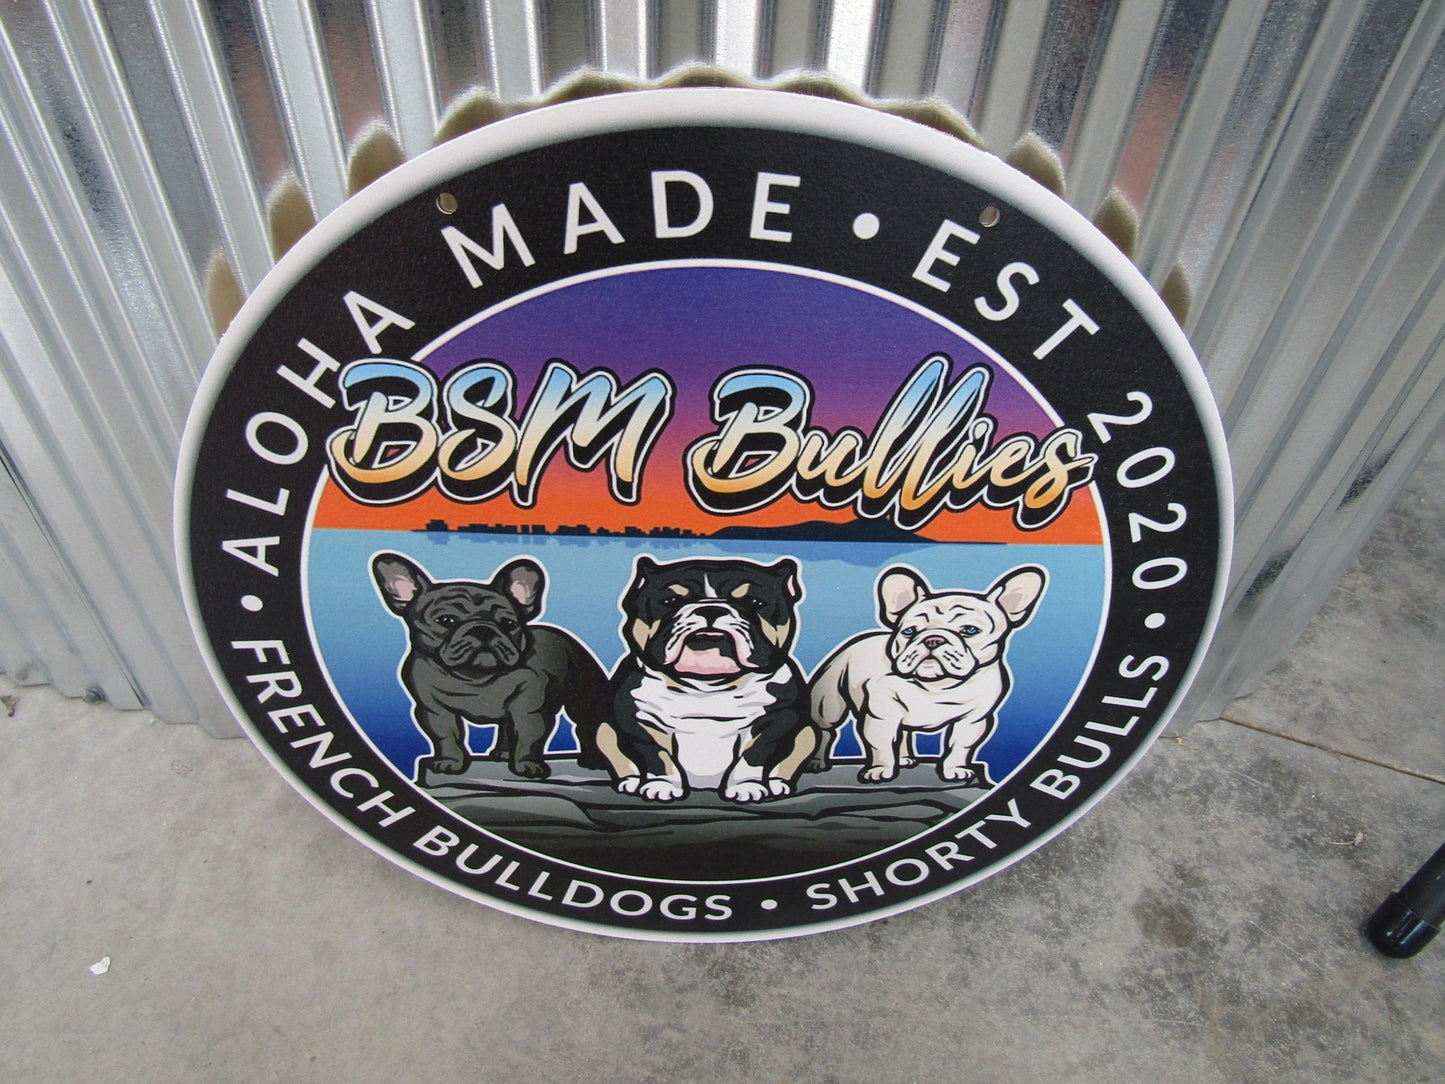 Custom Printed On Wood Sign Kennel Breeder Bullie Frenchie Shorty Dogs Pets Boarding Commerical Signage Your Logo Personalized Door Hanger